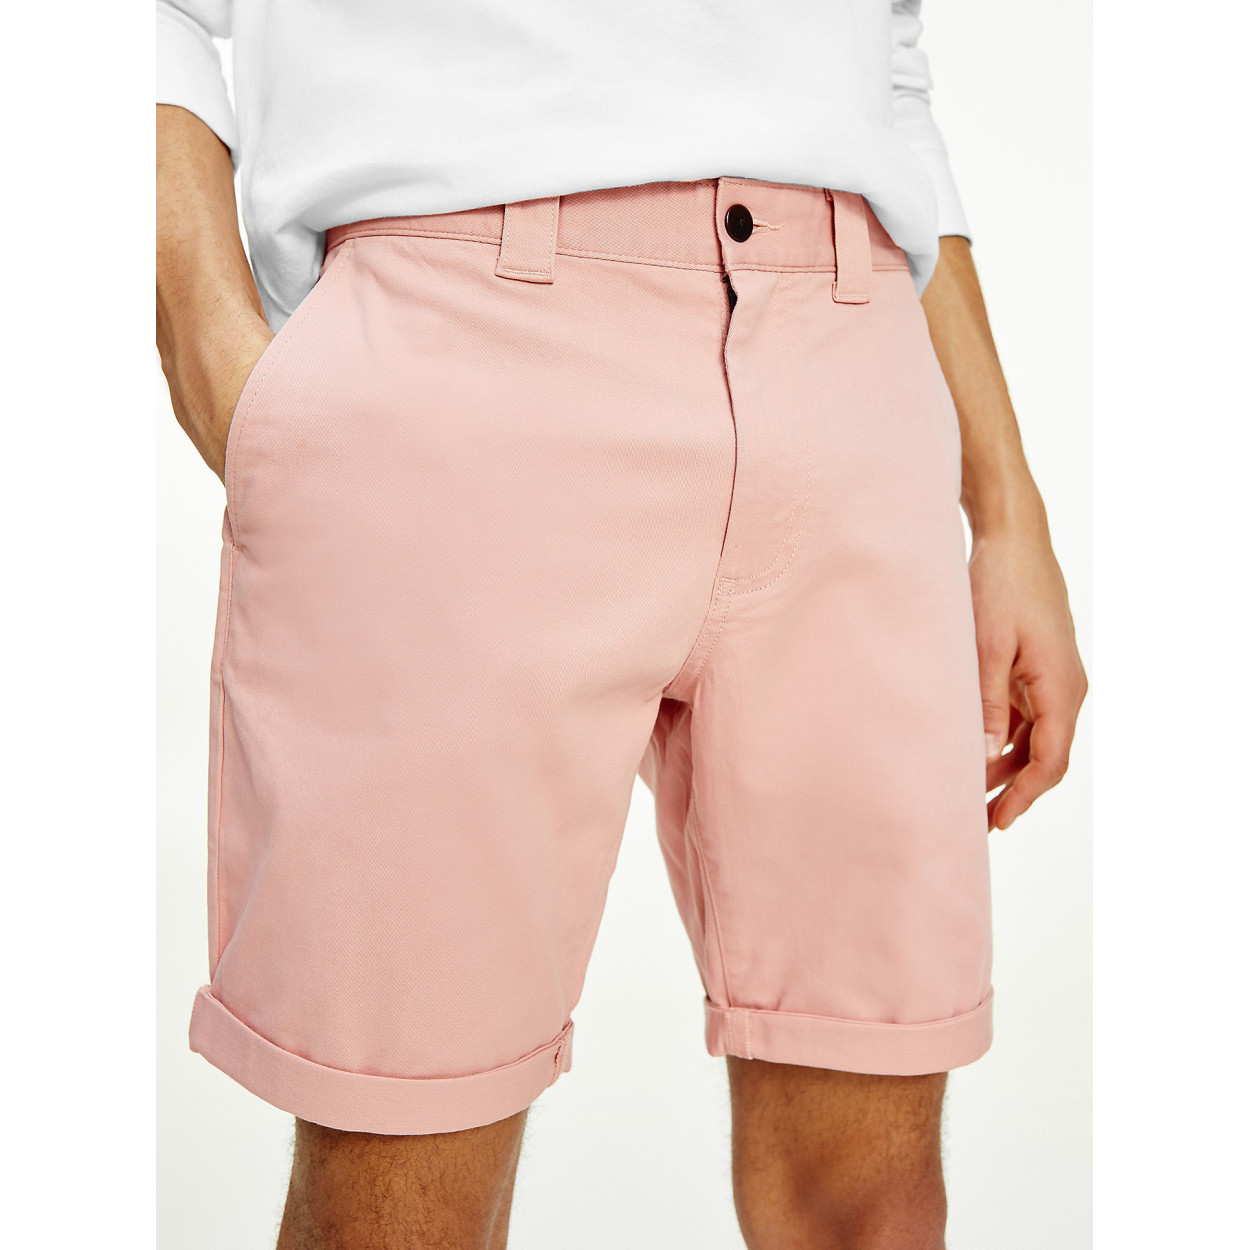 Tommy Hilfiger 9 in environ 22.86 cm Short chino rose Shadow pour homme taille 40 NEUF 